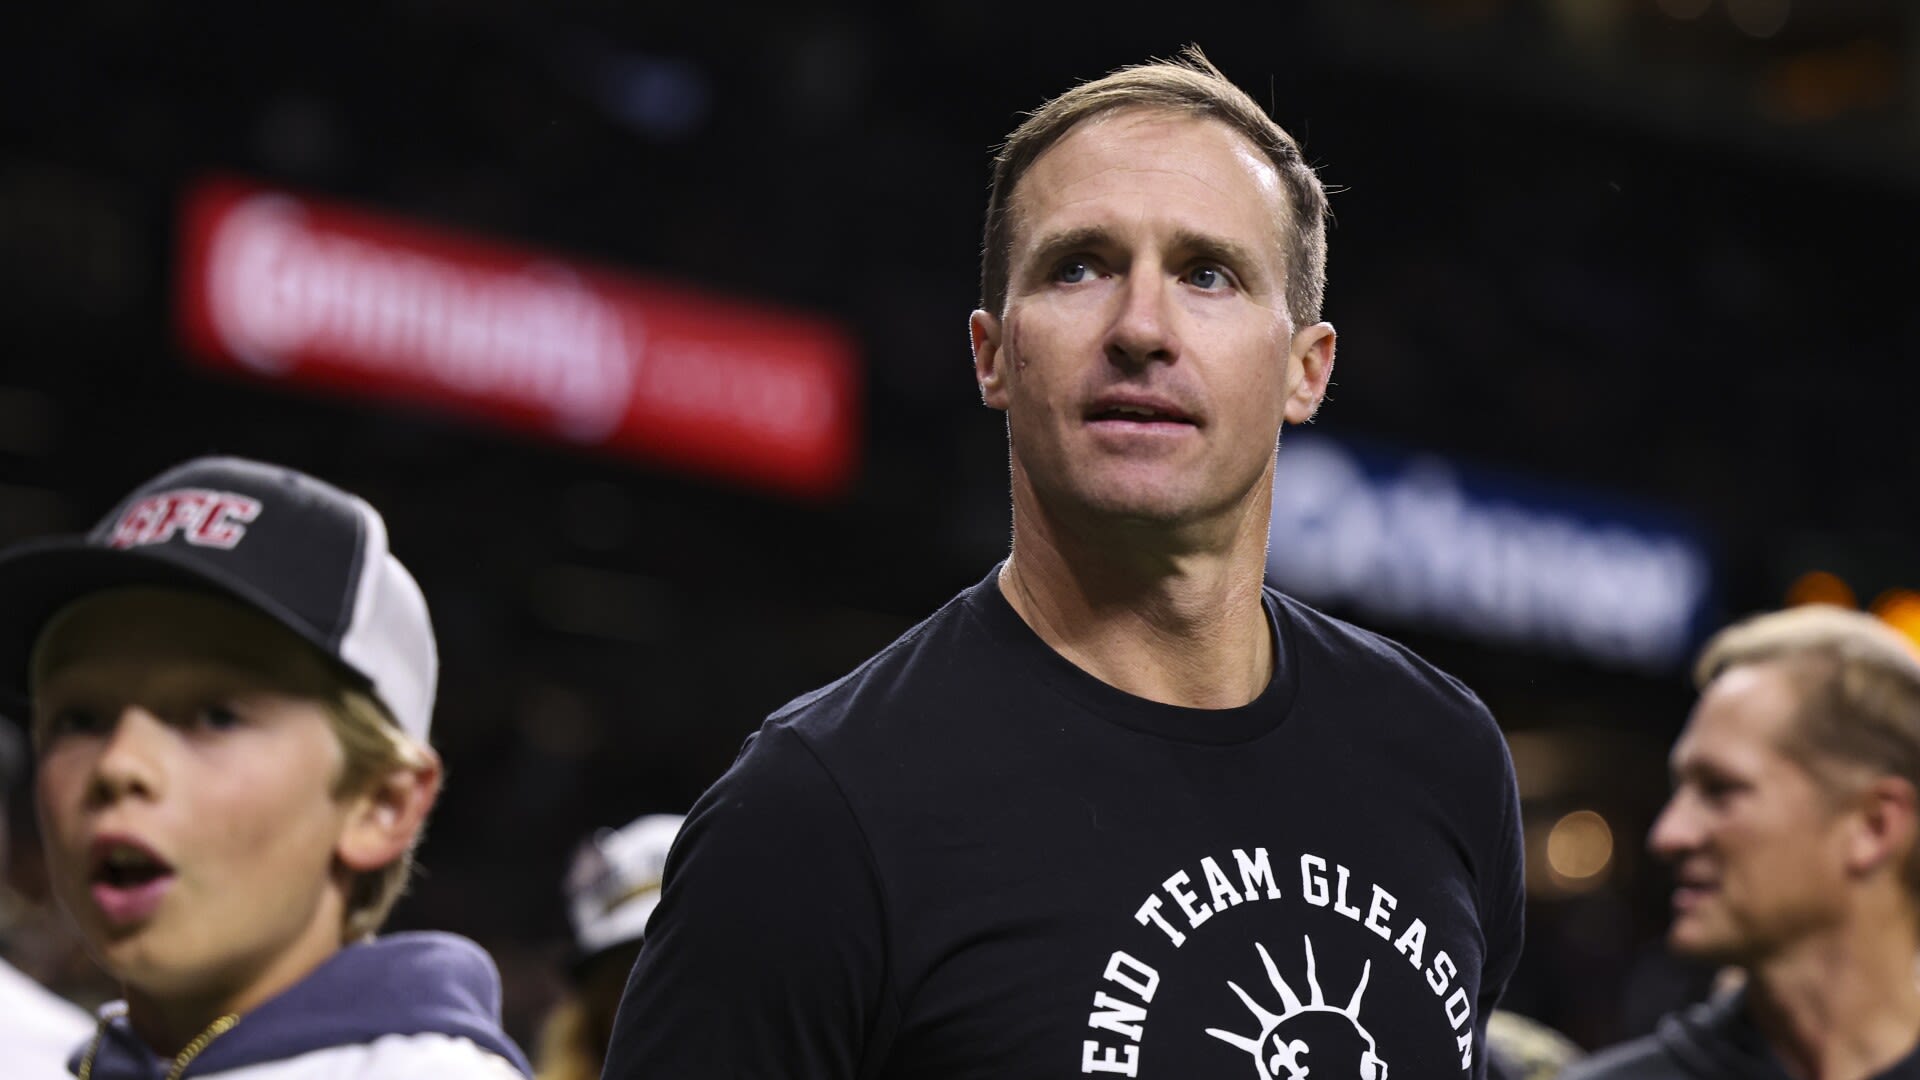 Drew Brees says but for shoulder, he probably would have played three more years